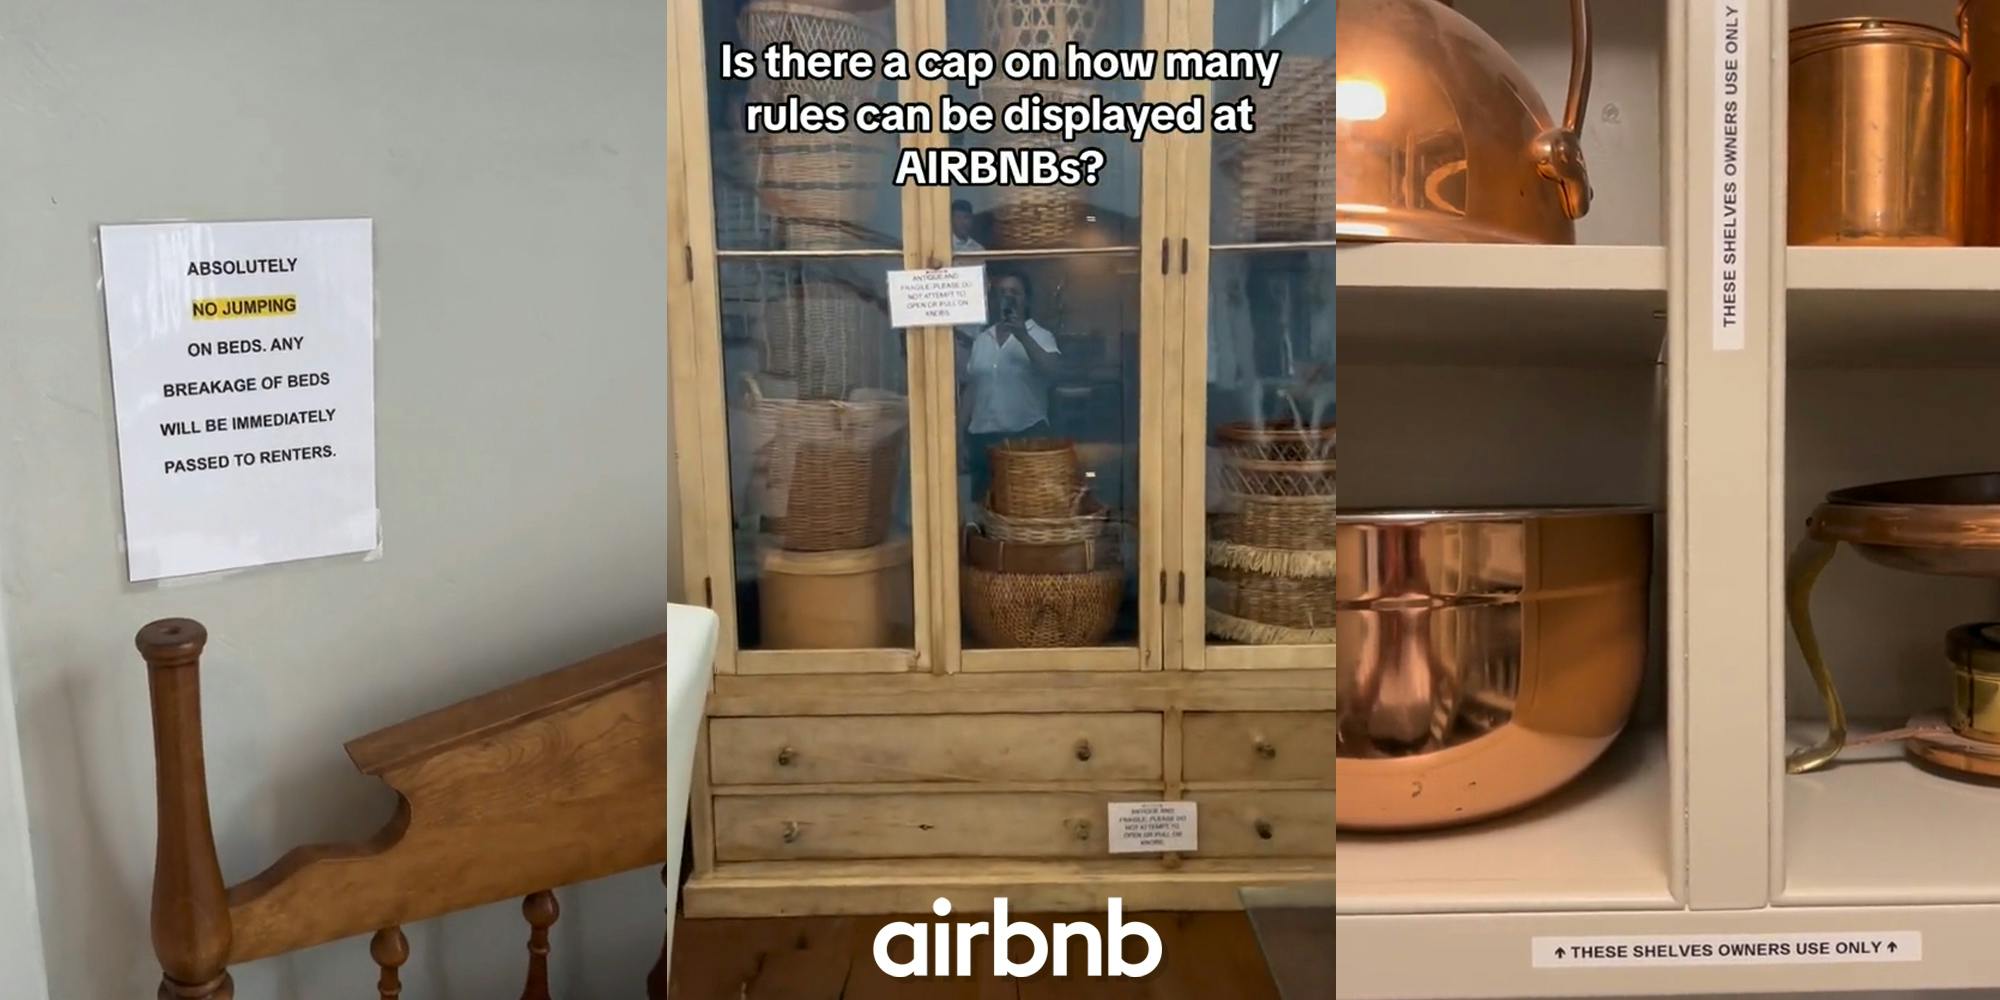 Airbnb interior with rules taped to wall next to bed (l) Airbnb cabinet with rules taped on the front with Airbnb logo at bottom with caption "Is there a cap on how many rules can be displayed at AIRBNBs?" (c) Airbnb interior shelves with rules taped to edges (r)